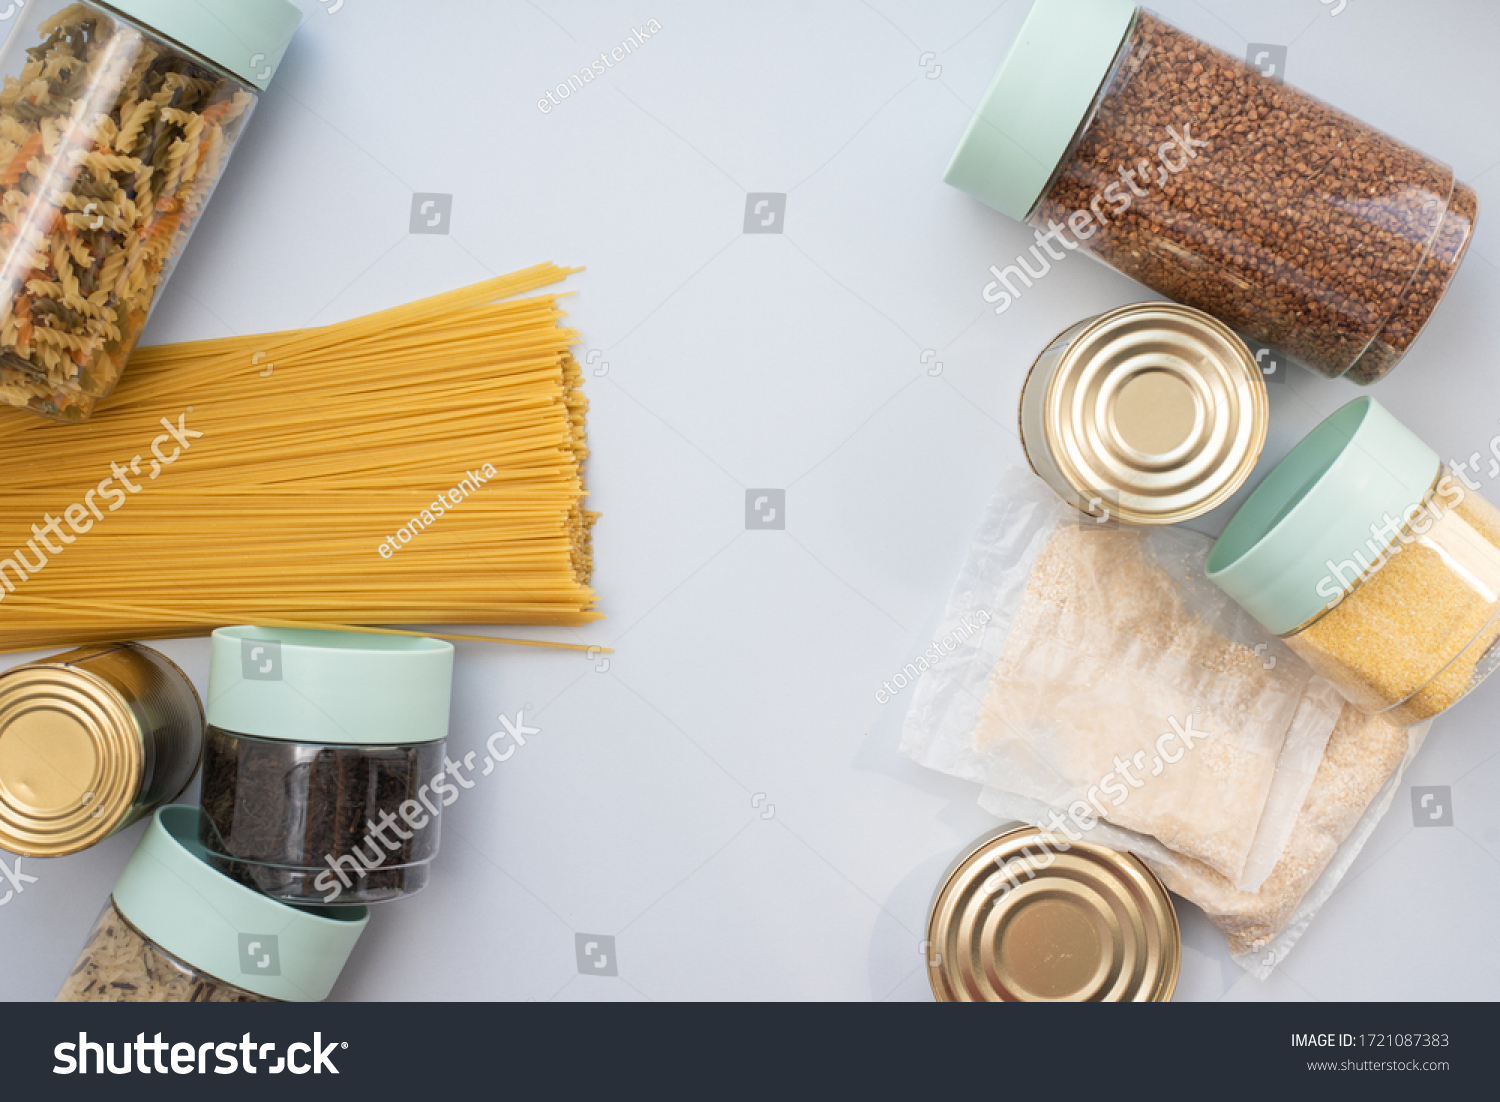 Canned food, pasta, groats and pasta on a blue background. Donates for low-income families during the coronavirus #1721087383